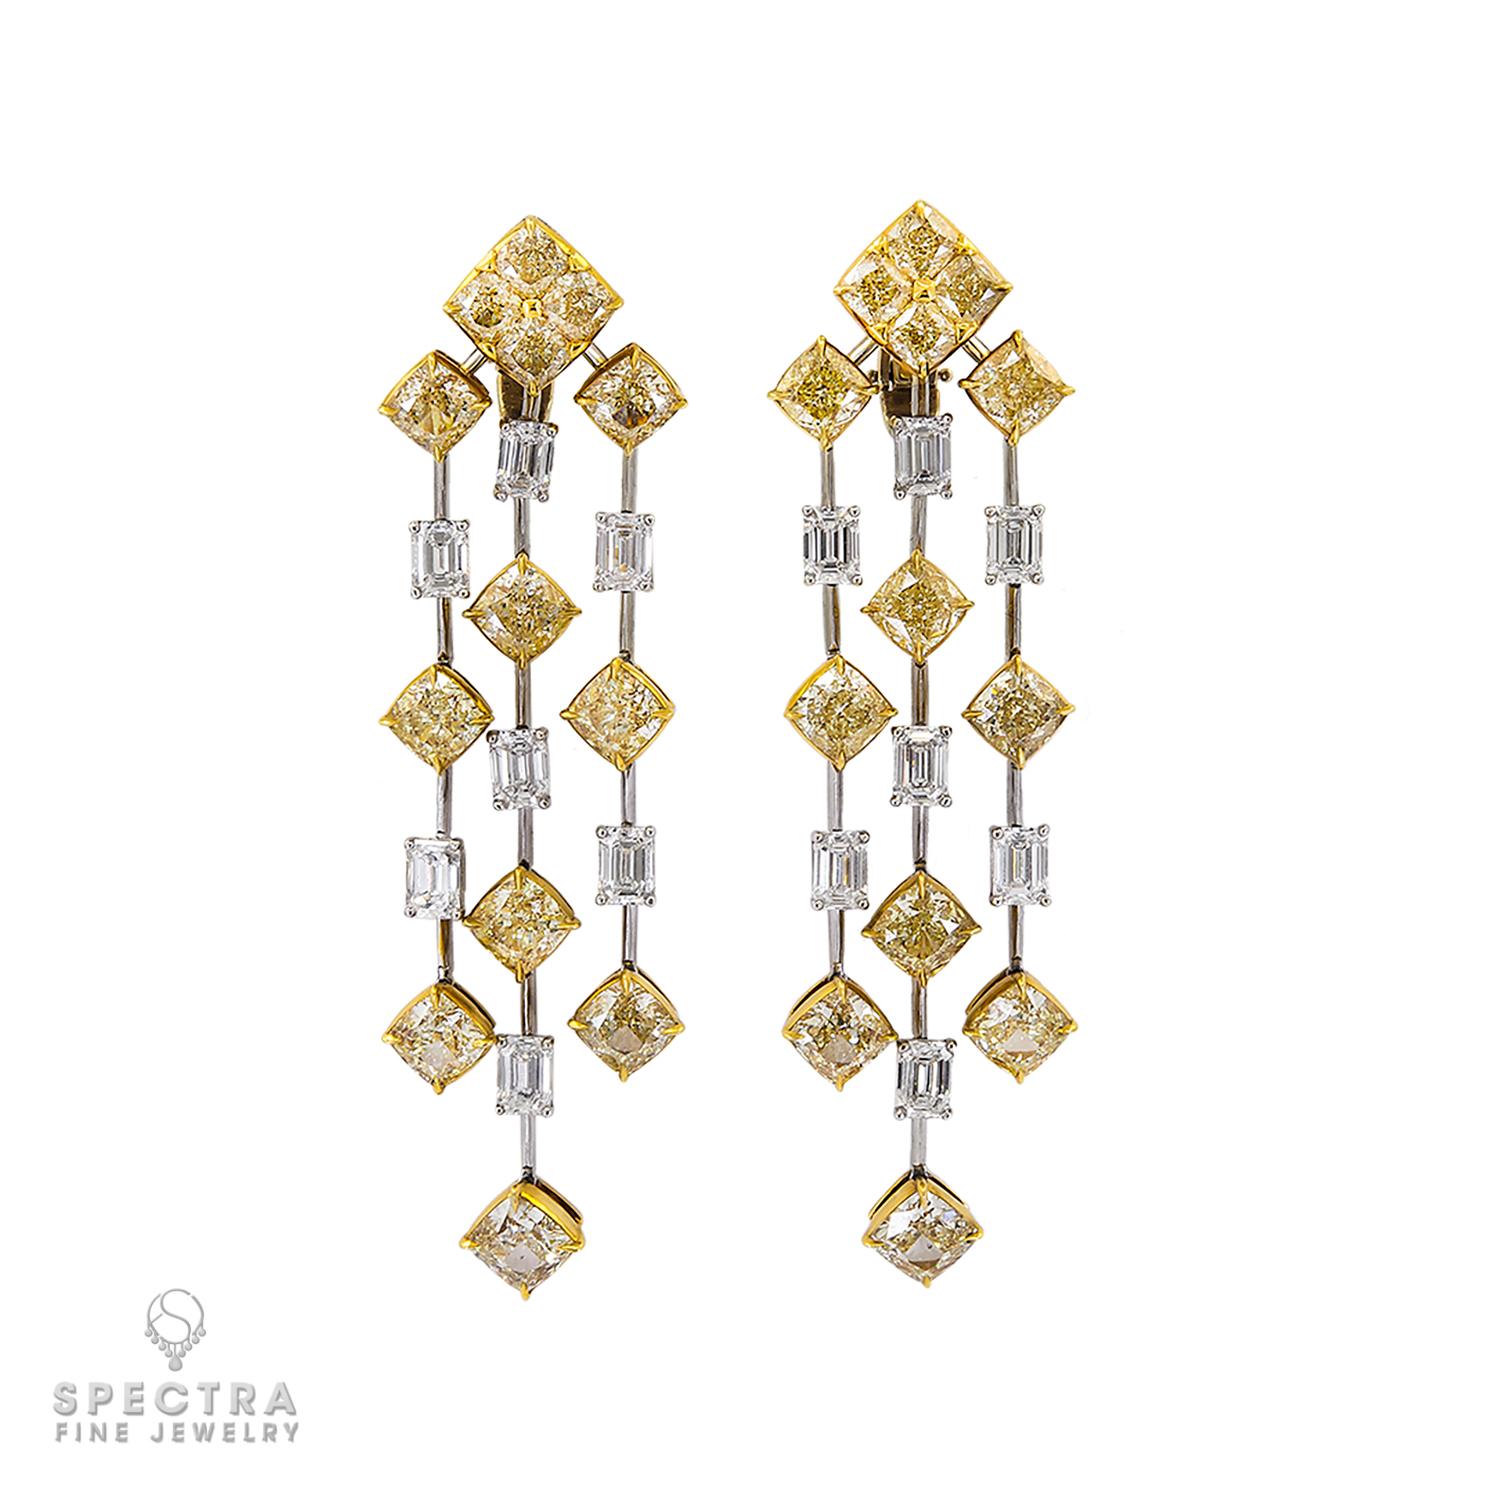 Contemporary Spectra Fine Jewelry GIA Certified Yellow & White Diamond Chandelier Earrings For Sale